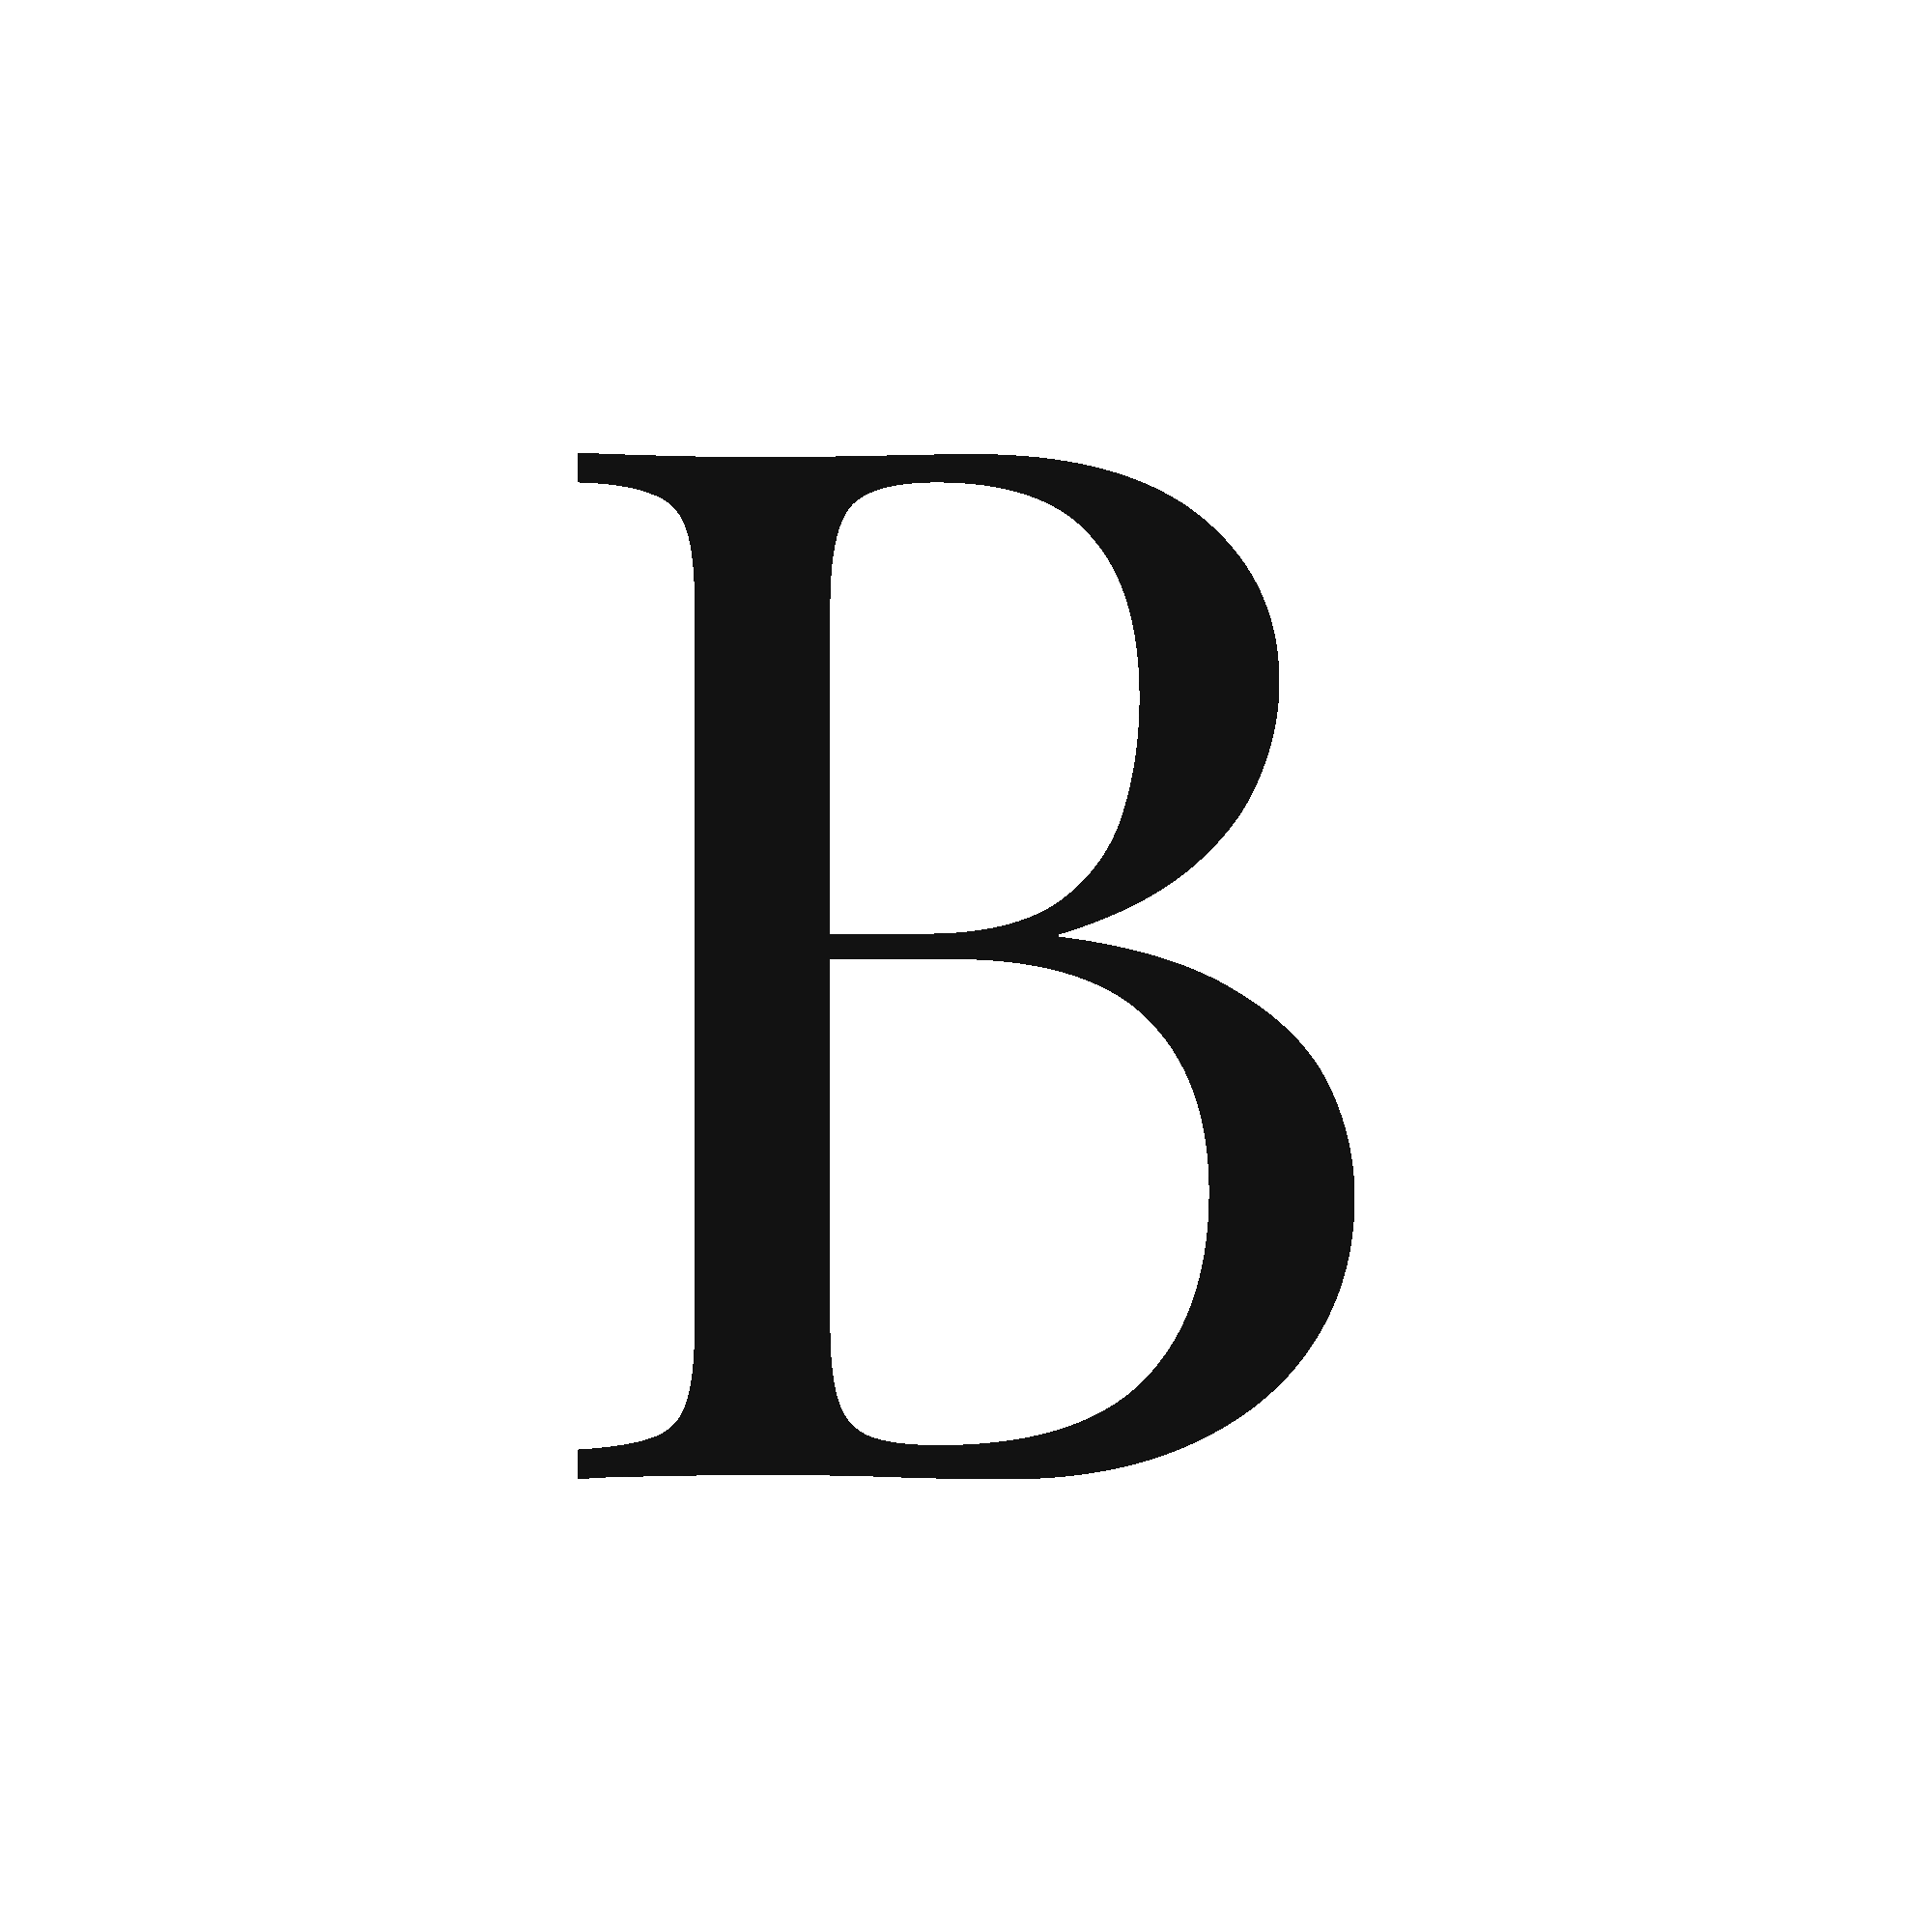 The letter "B," a palm with the thumb folded in, an array of "+" signs, an array of the letters "x," the letter "I," the letter "i" in a bracket, the "+" sign in a bracket, a man with a beard wearing a beanie and glasses, the letter "M," a fist, another "m," the WD-40 spray, and an array of nine "m" letter, all appearing in succession